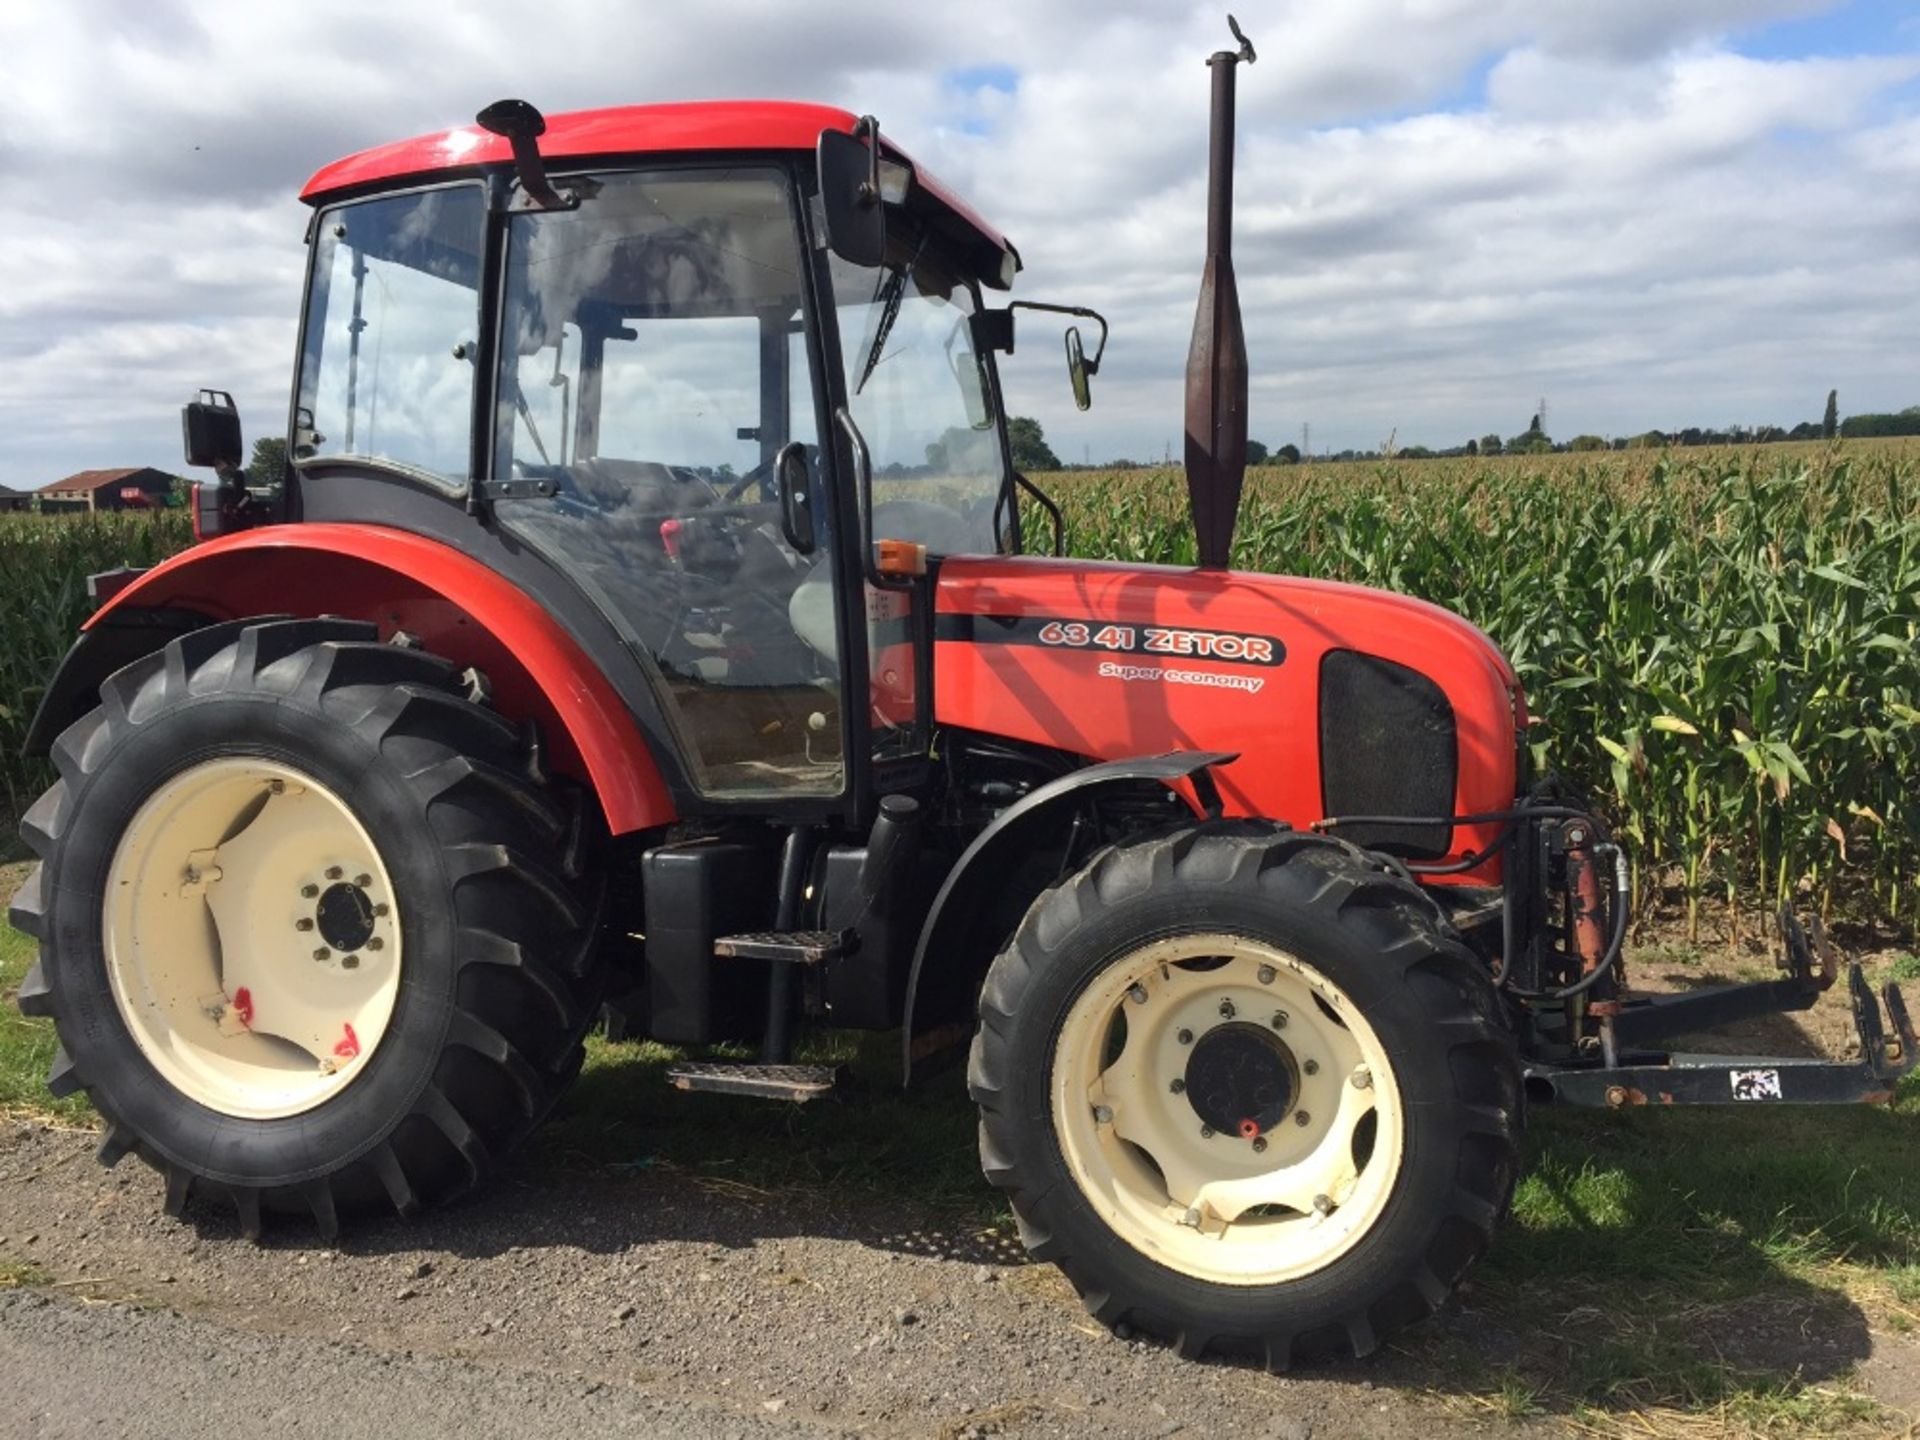 1997 Zetor 6341 4wd Tractor with Front Linkage. Showing 2721 hrs Ser No 001248 - Image 2 of 3